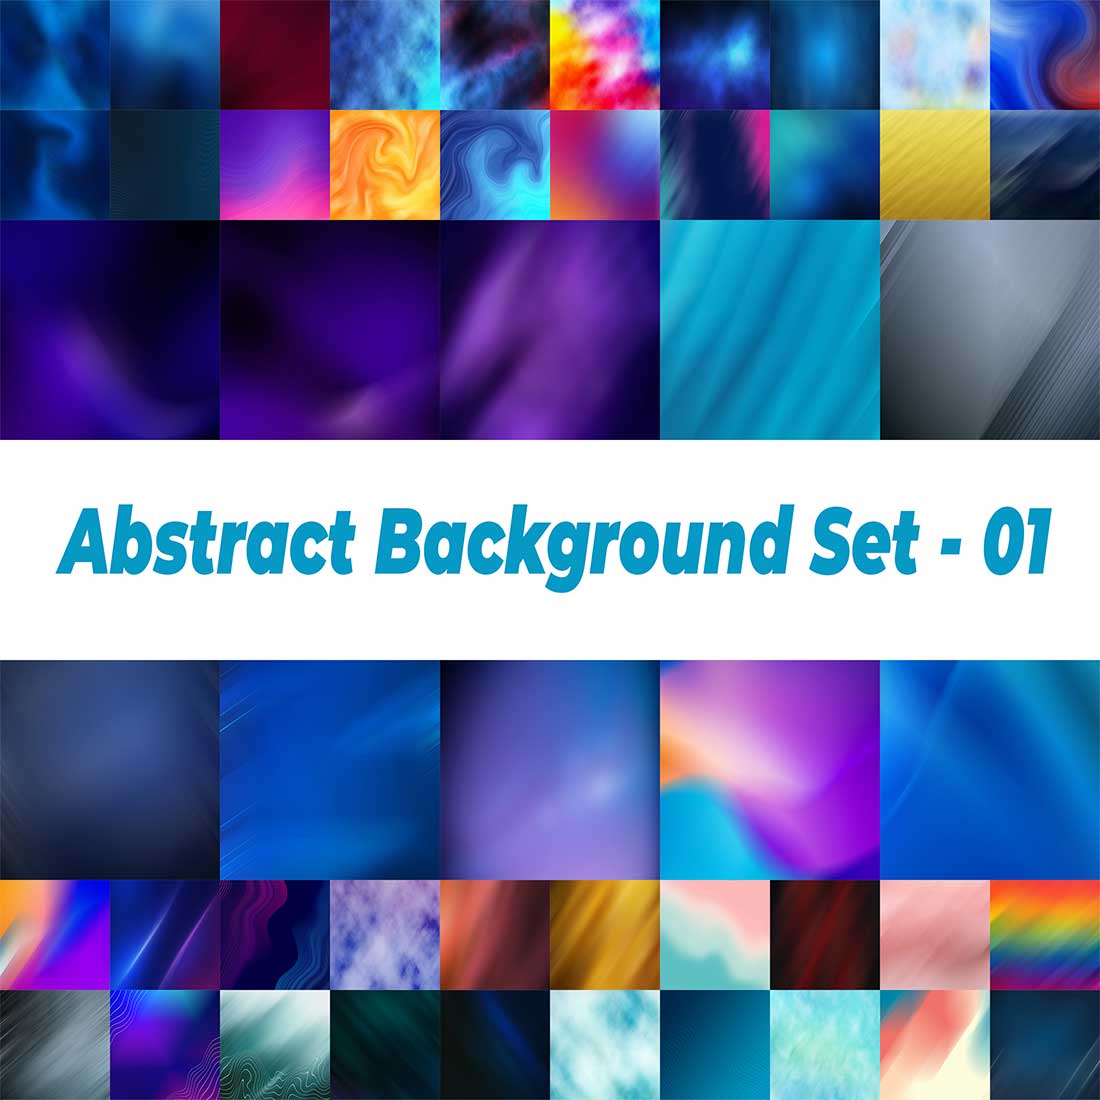 Abstract Background Gradient Luxury Vivid Blurred Colorful Texture Wallpaper Photo main cover.